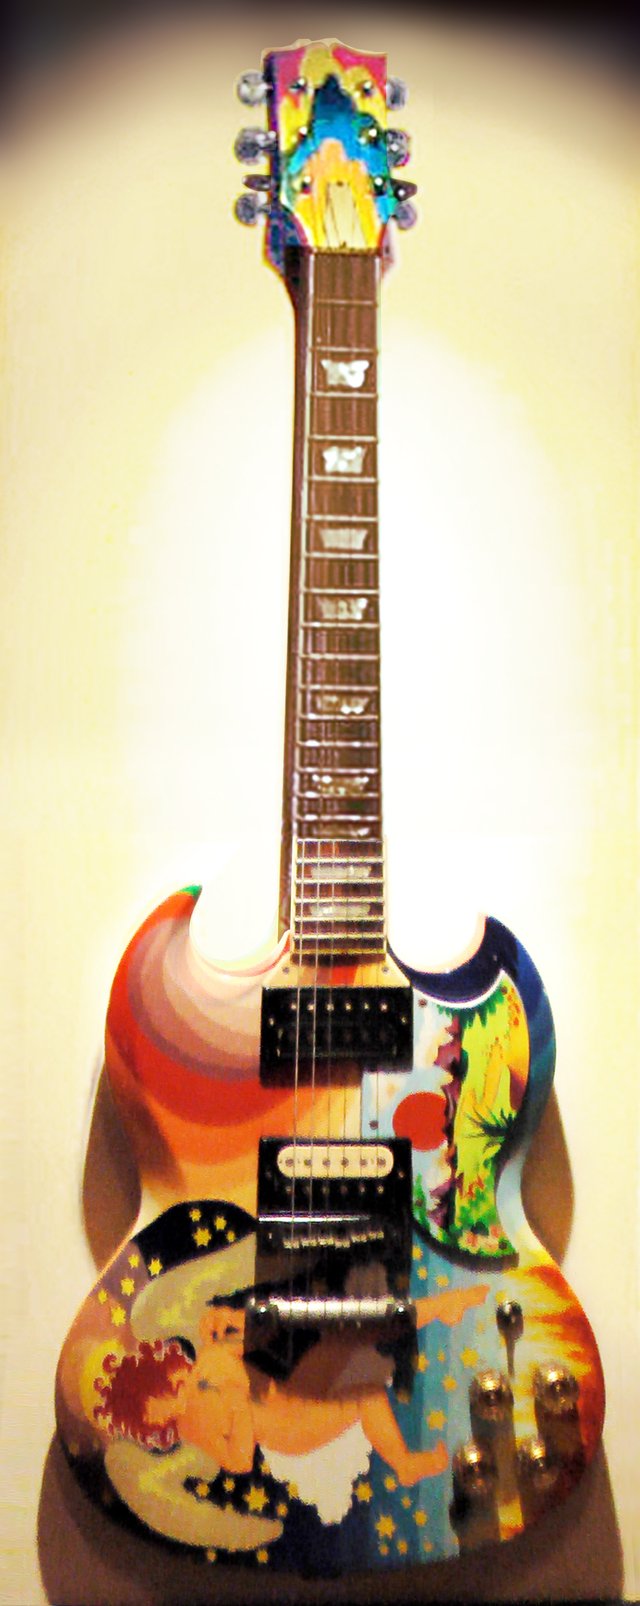 Clapton's The Fool guitar (replica shown), with its bright artwork and famous "woman tone", was symbolic of the 1960s psychedelic rock era.